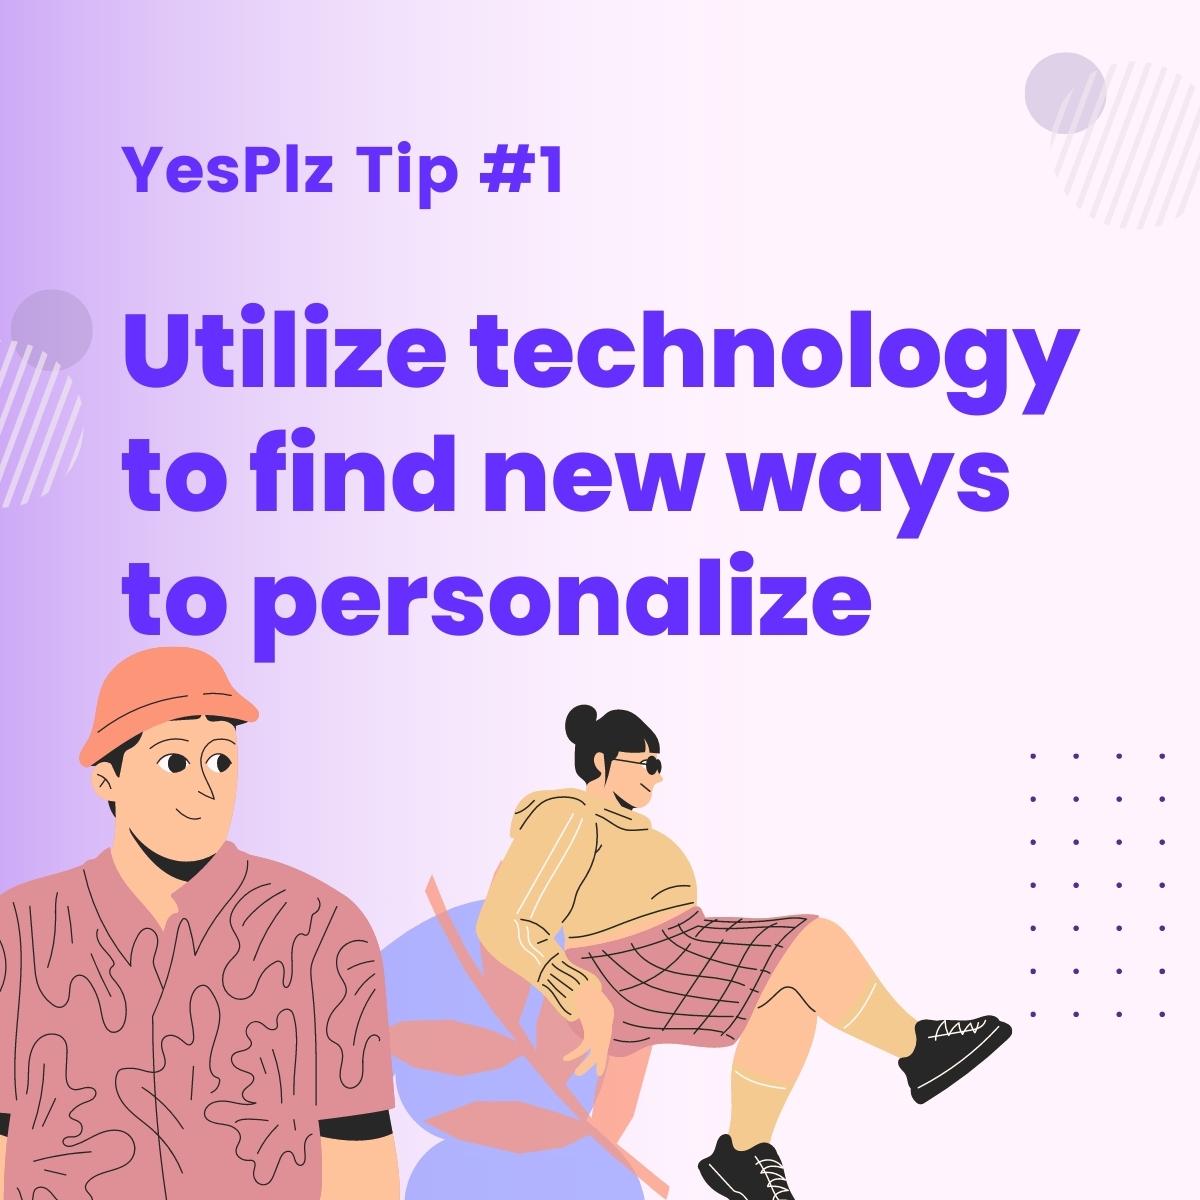 YesPlz tip to use technology for personalization in digital transformation